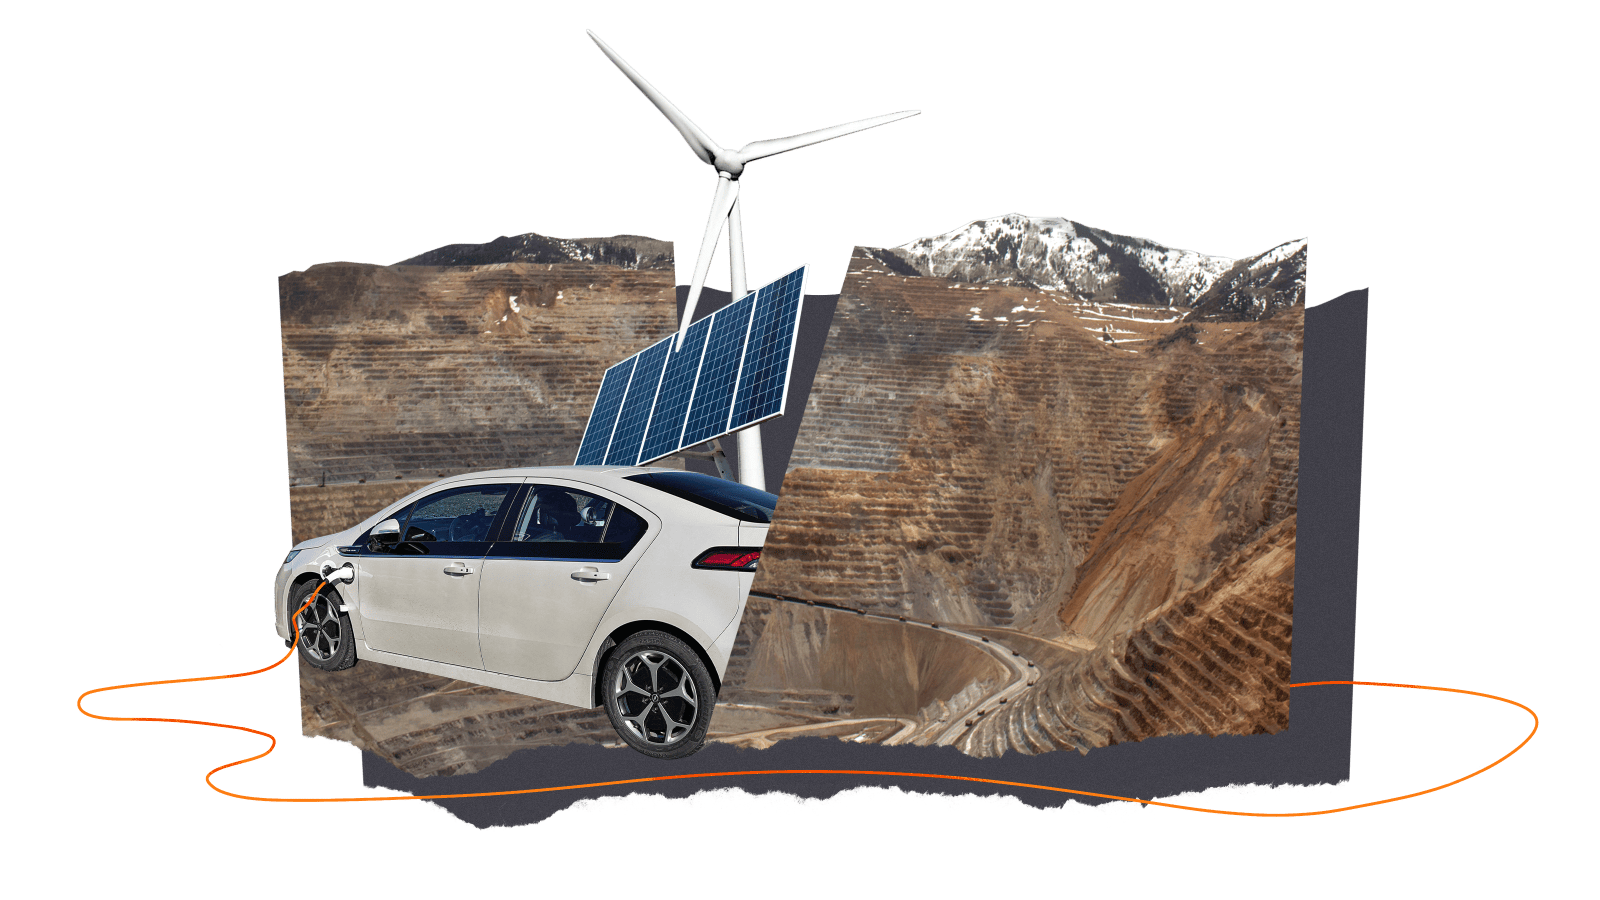 Collage: a hardrock mine with mountains in the background with objects coming out of the center: a solar panel, a wind turbine, and an electric car with a long orang electric cord plugged into it and winding around the mountain